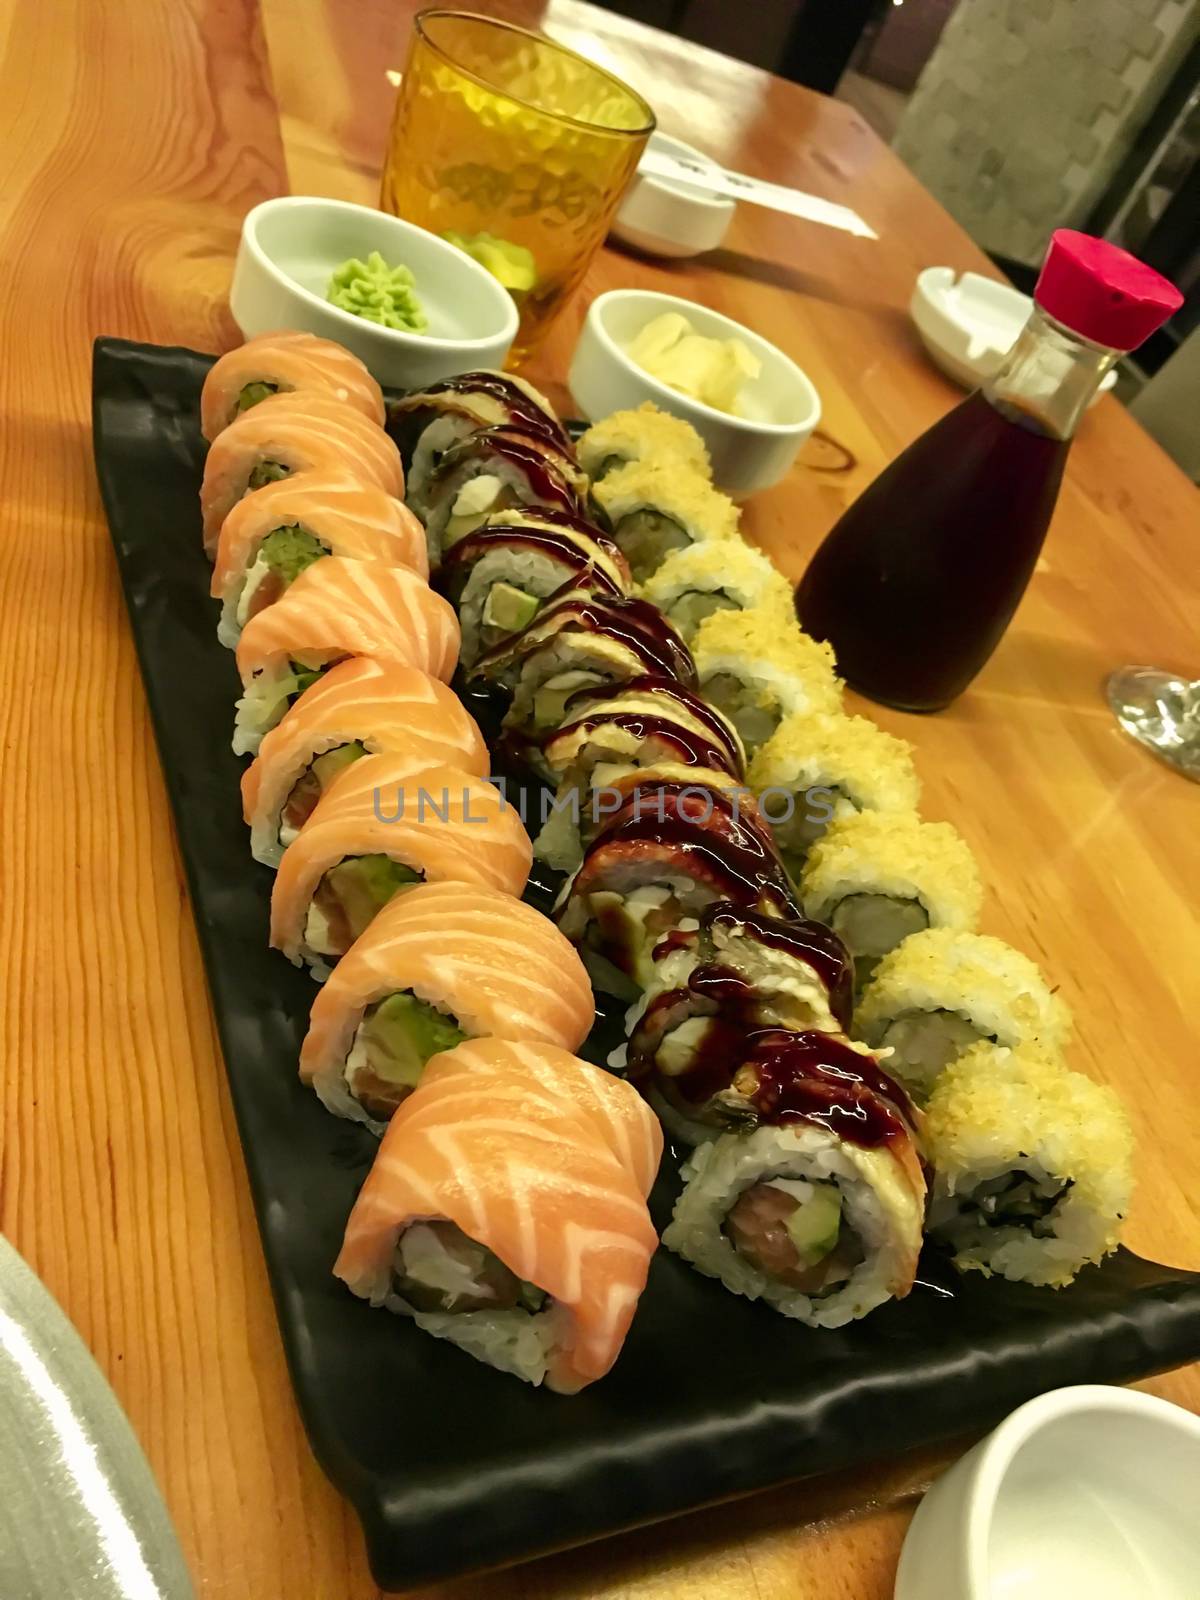 Delicious sushi and rolls on a table in a restaurant